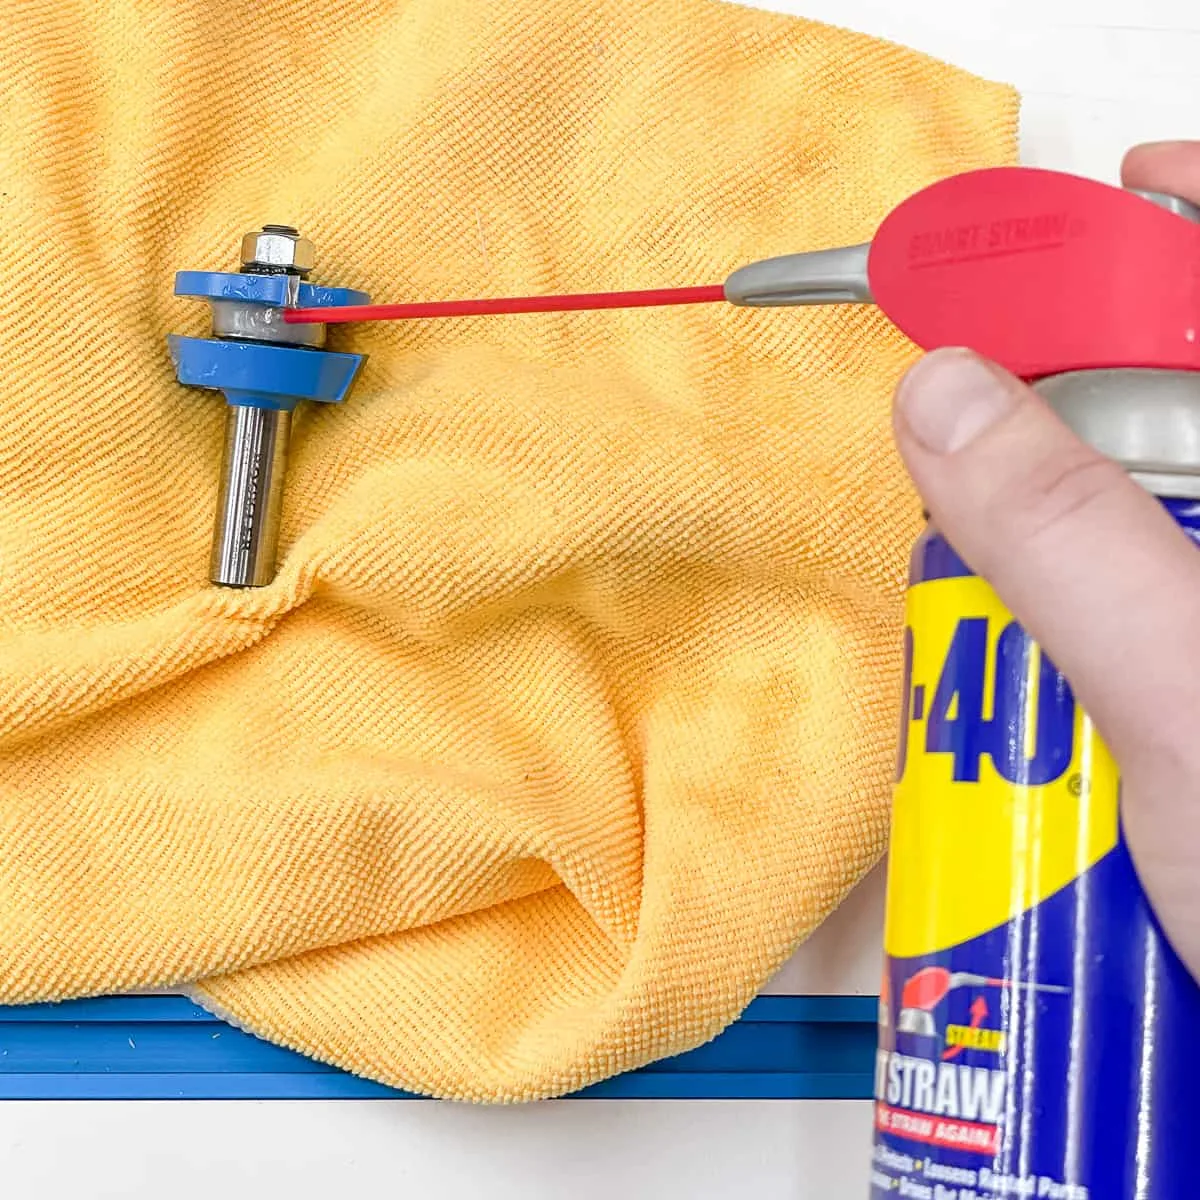 spraying router bit with wd-40 to prevent rusting after cleaning